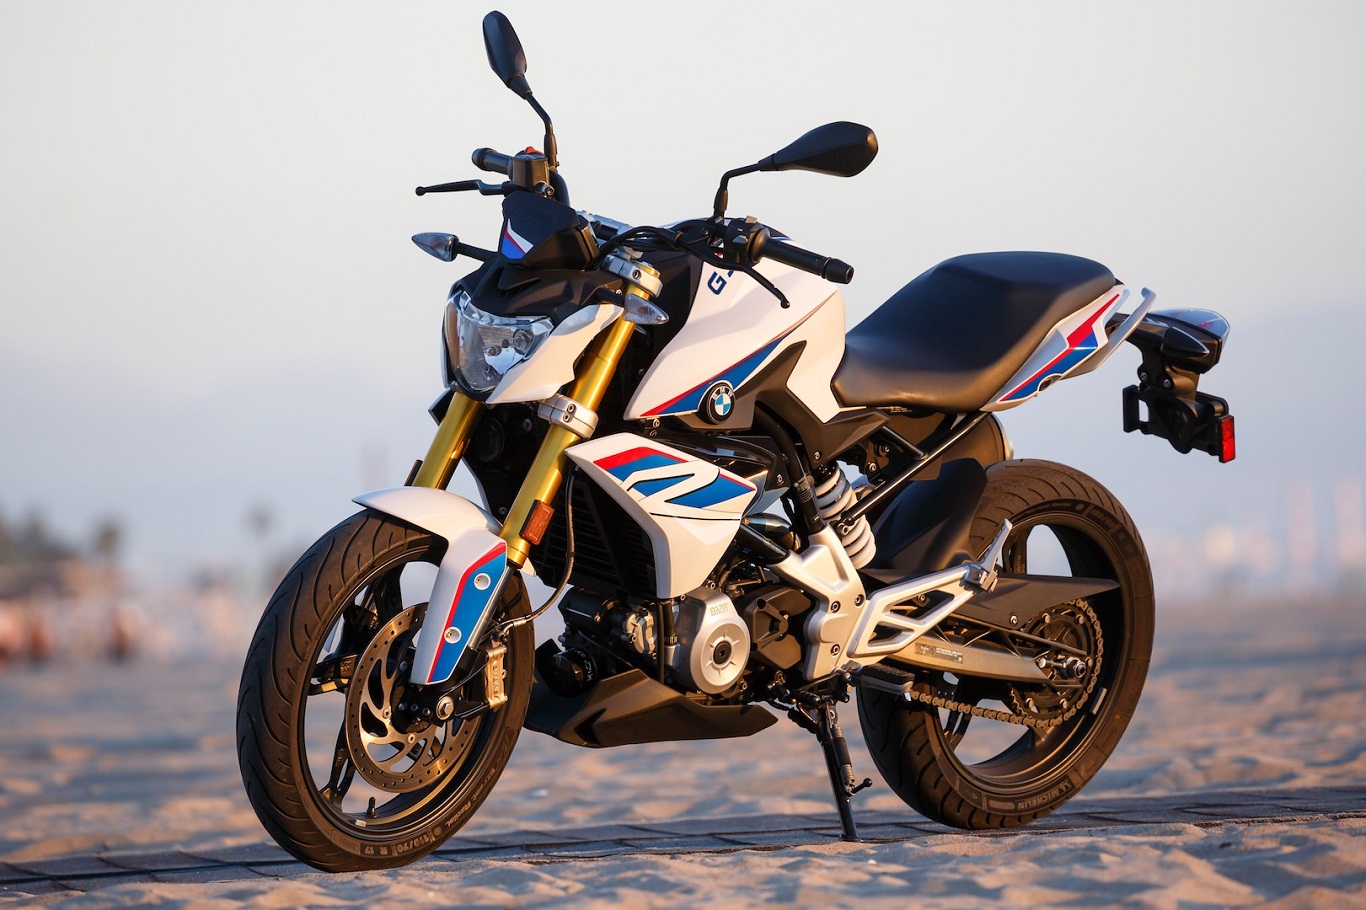 2021 BMW G 310 R Officially Launches In Europe